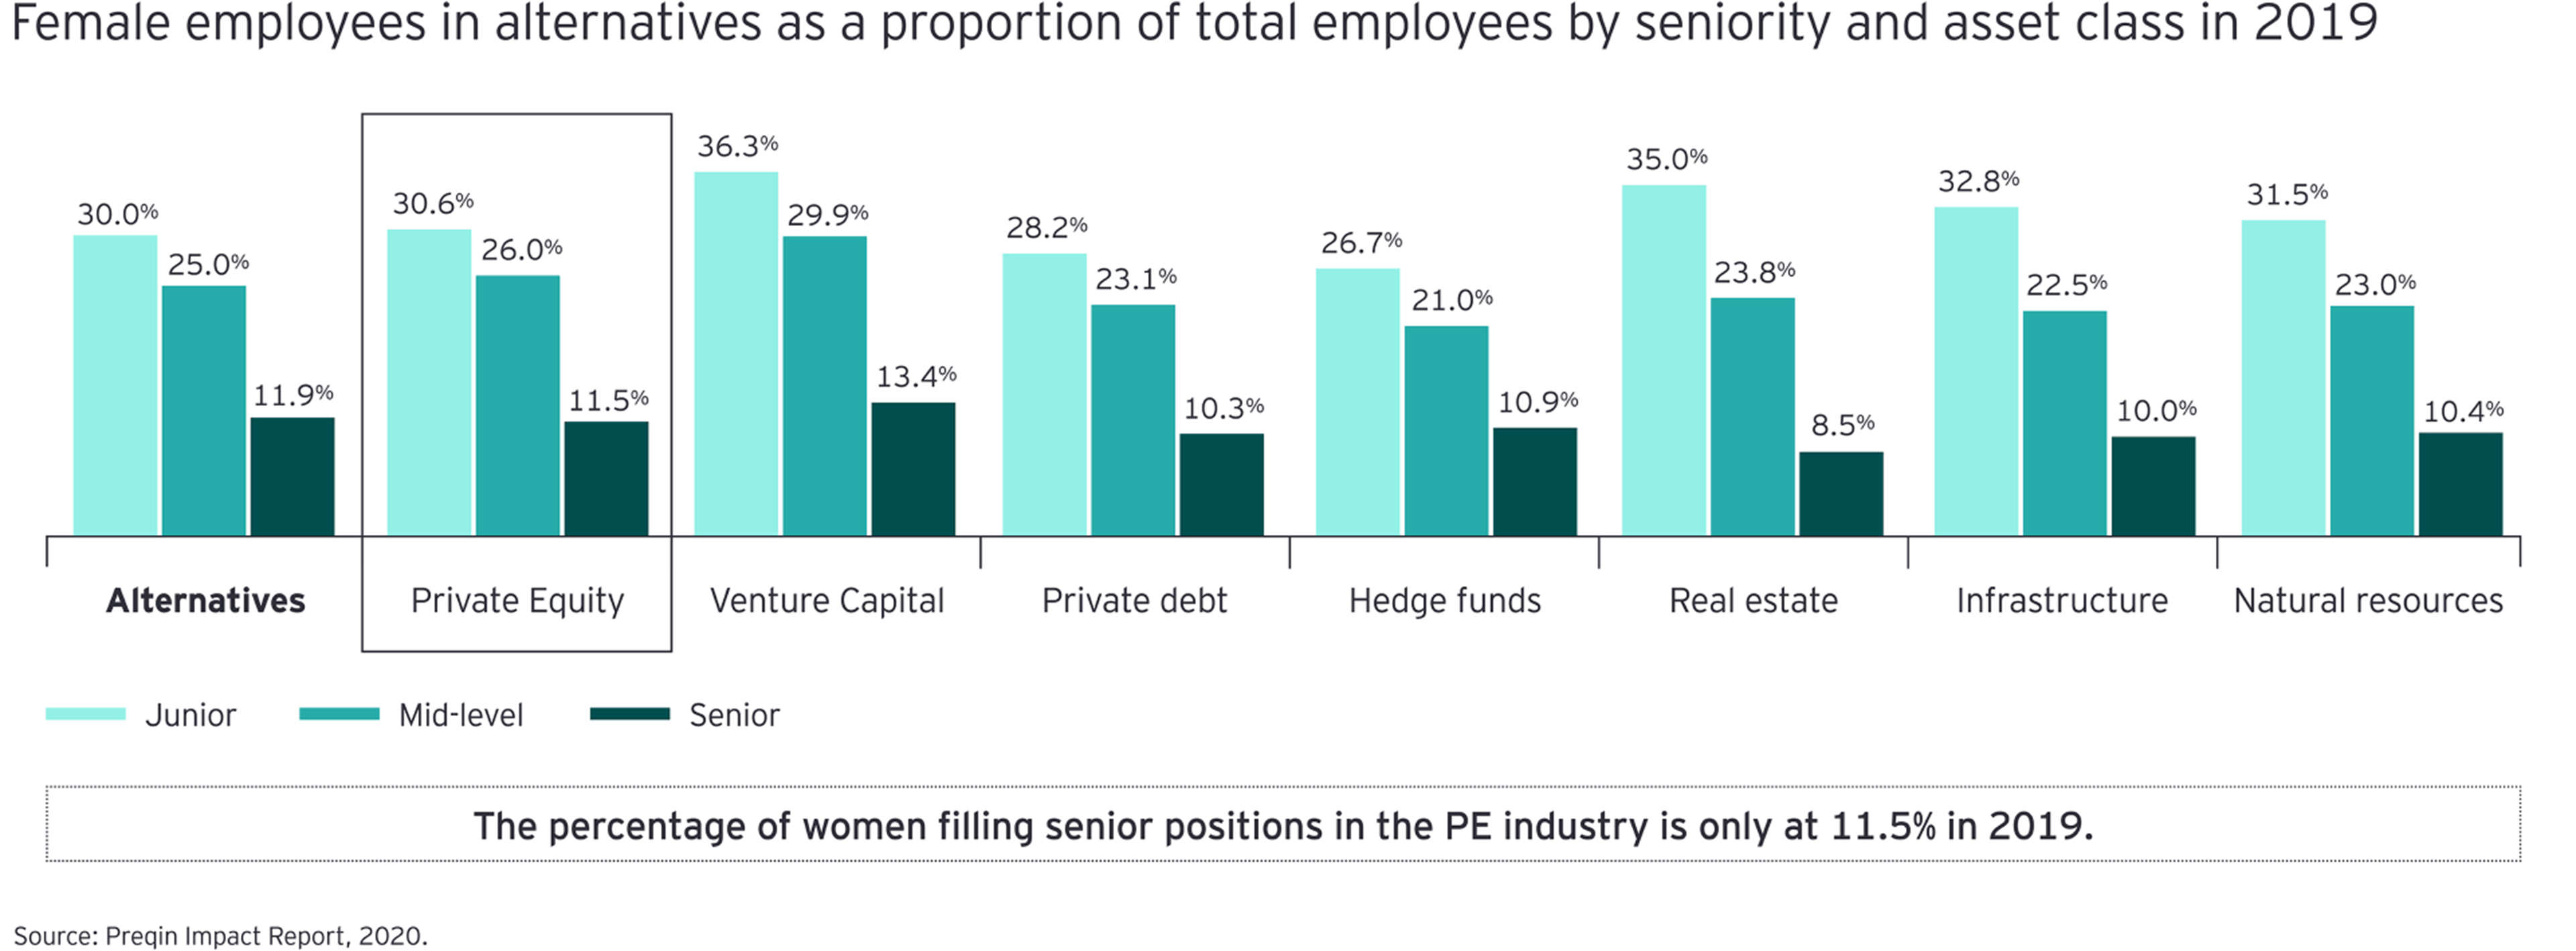 Percentage of women filling senior positions in the pe industry